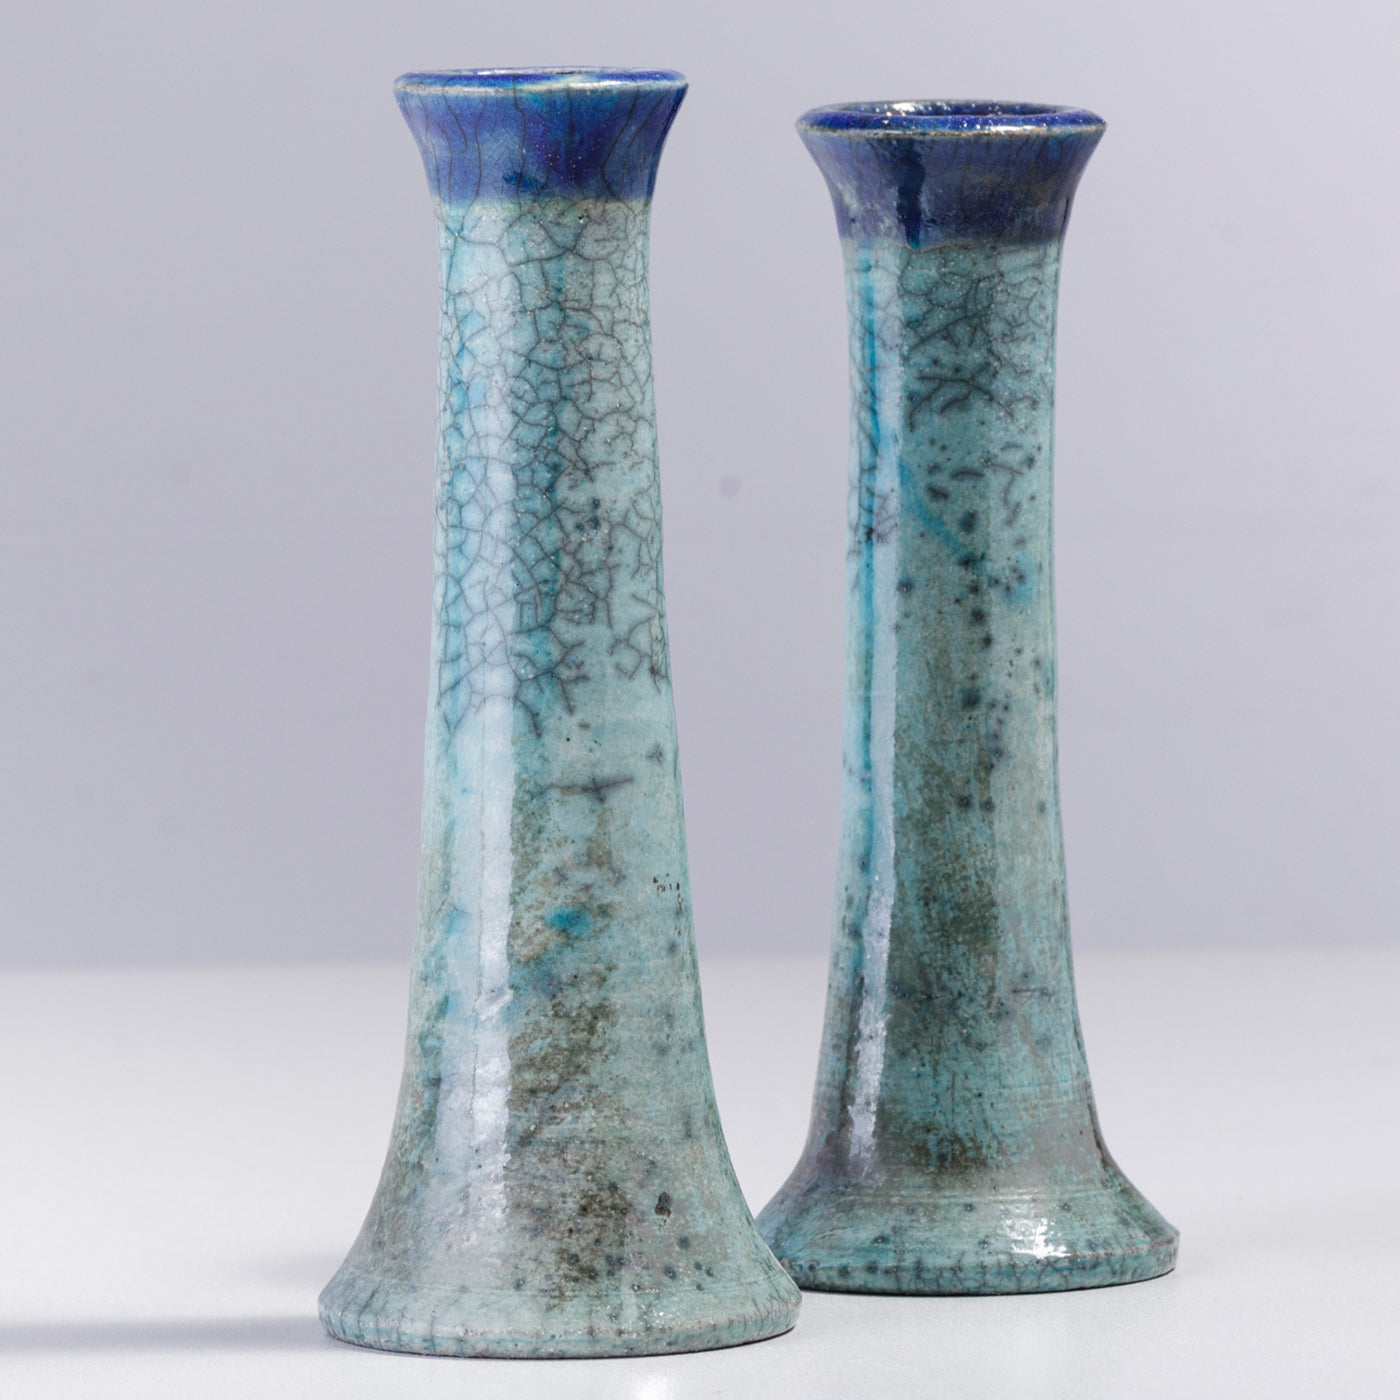 Stelo Set of 2 Candle Holders - Alternative view 2